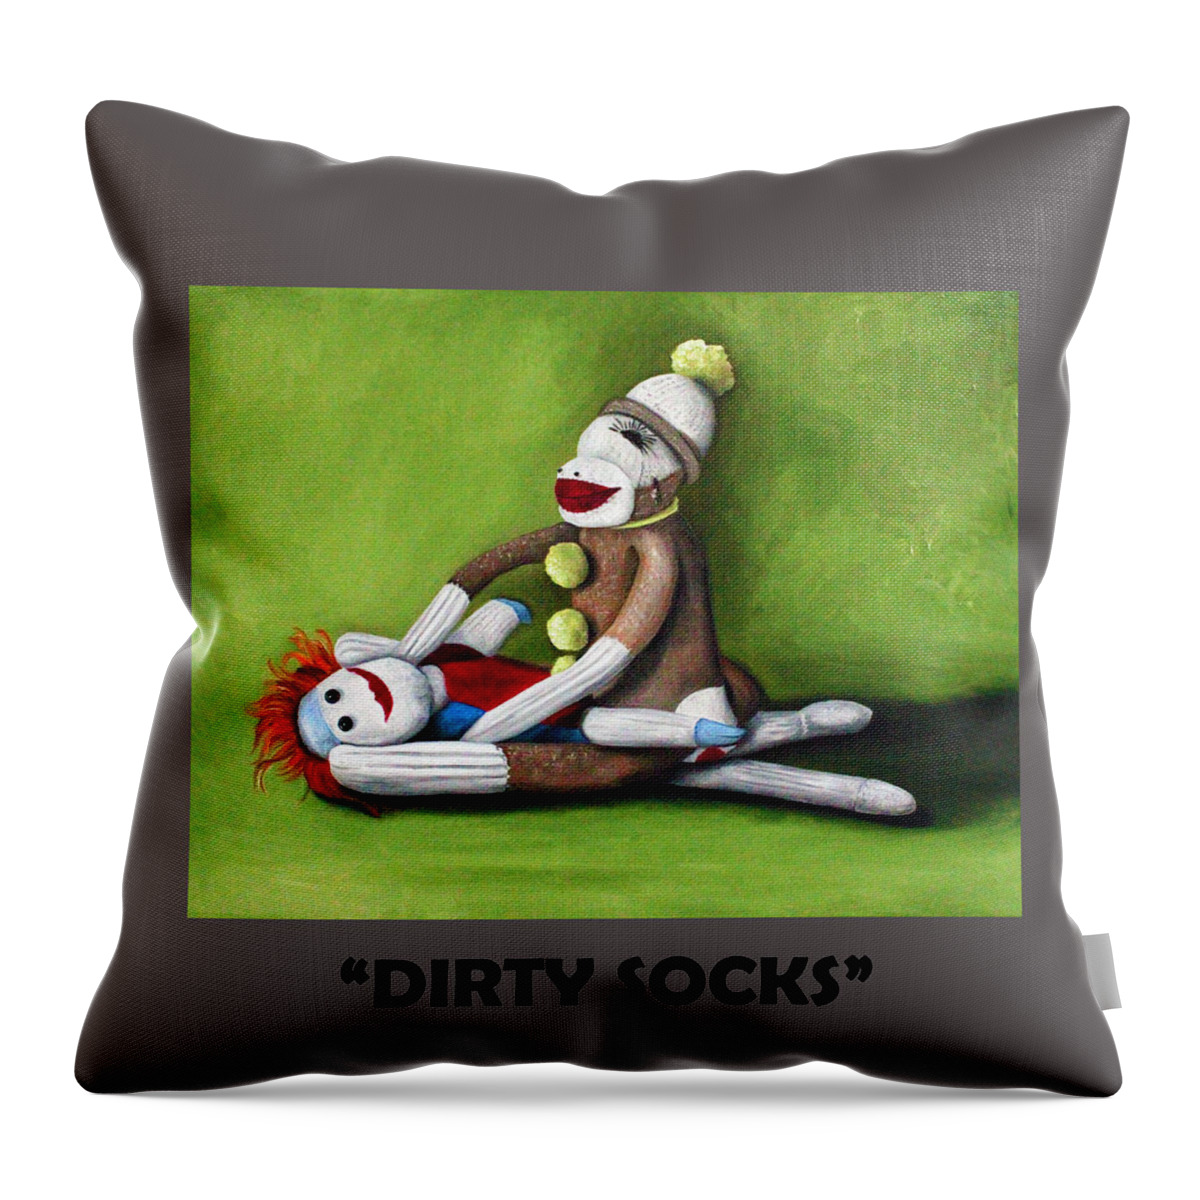 Dirty Socks Throw Pillow featuring the painting Dirty Socks With Lettering by Leah Saulnier The Painting Maniac